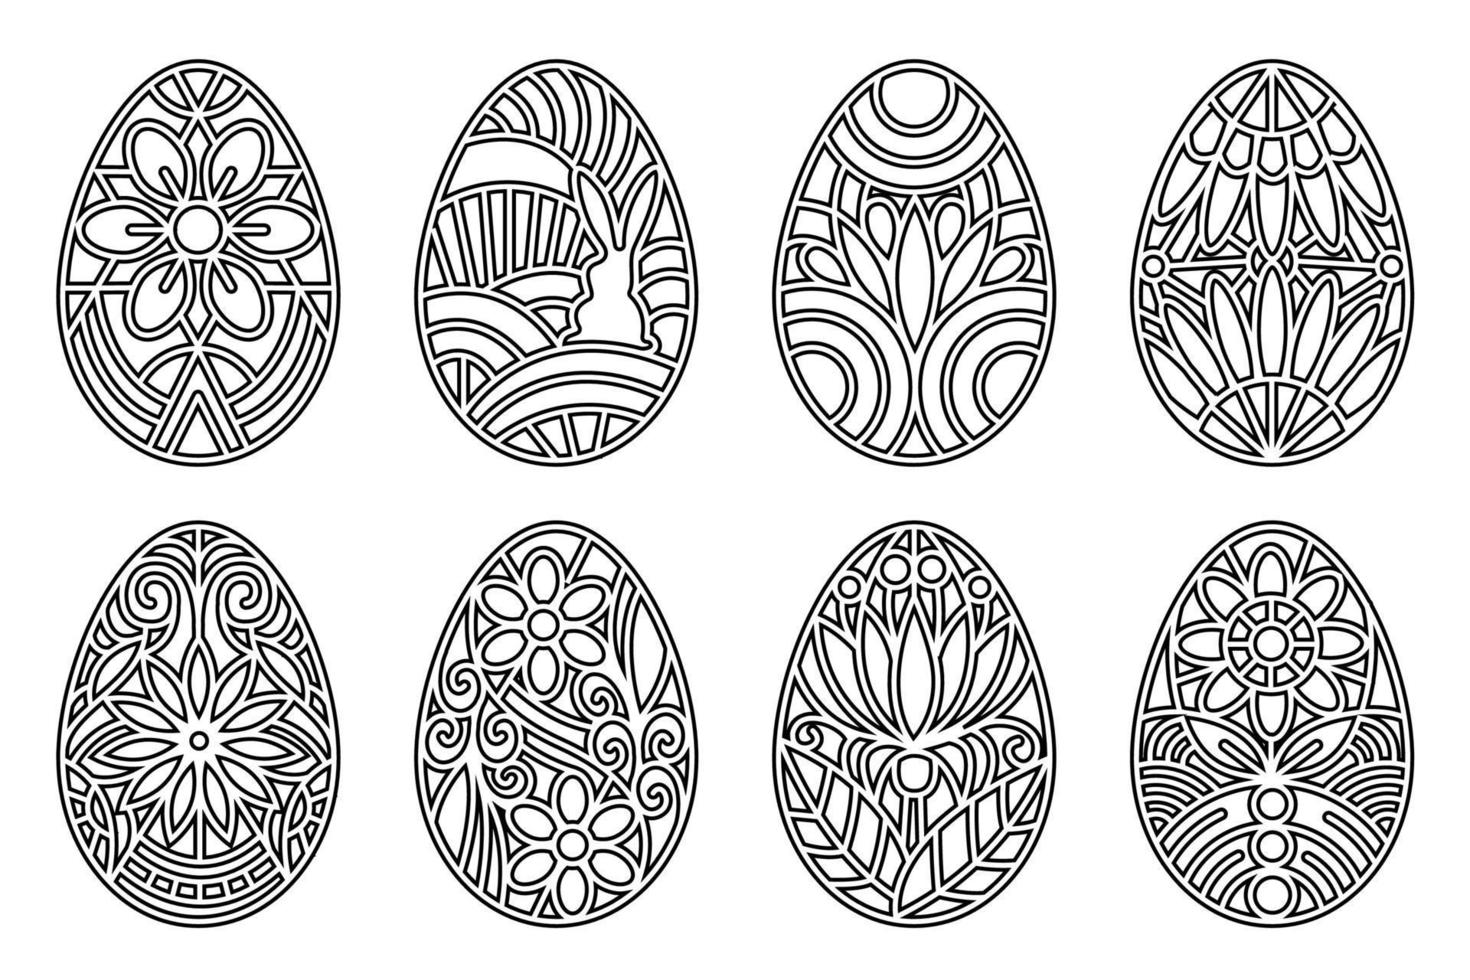 Easter eggs decorative design elements. Black thin line art outline ornate eggs isolated on white background. Easter egg design decorated with floral elements. Vector Easter illustration set.